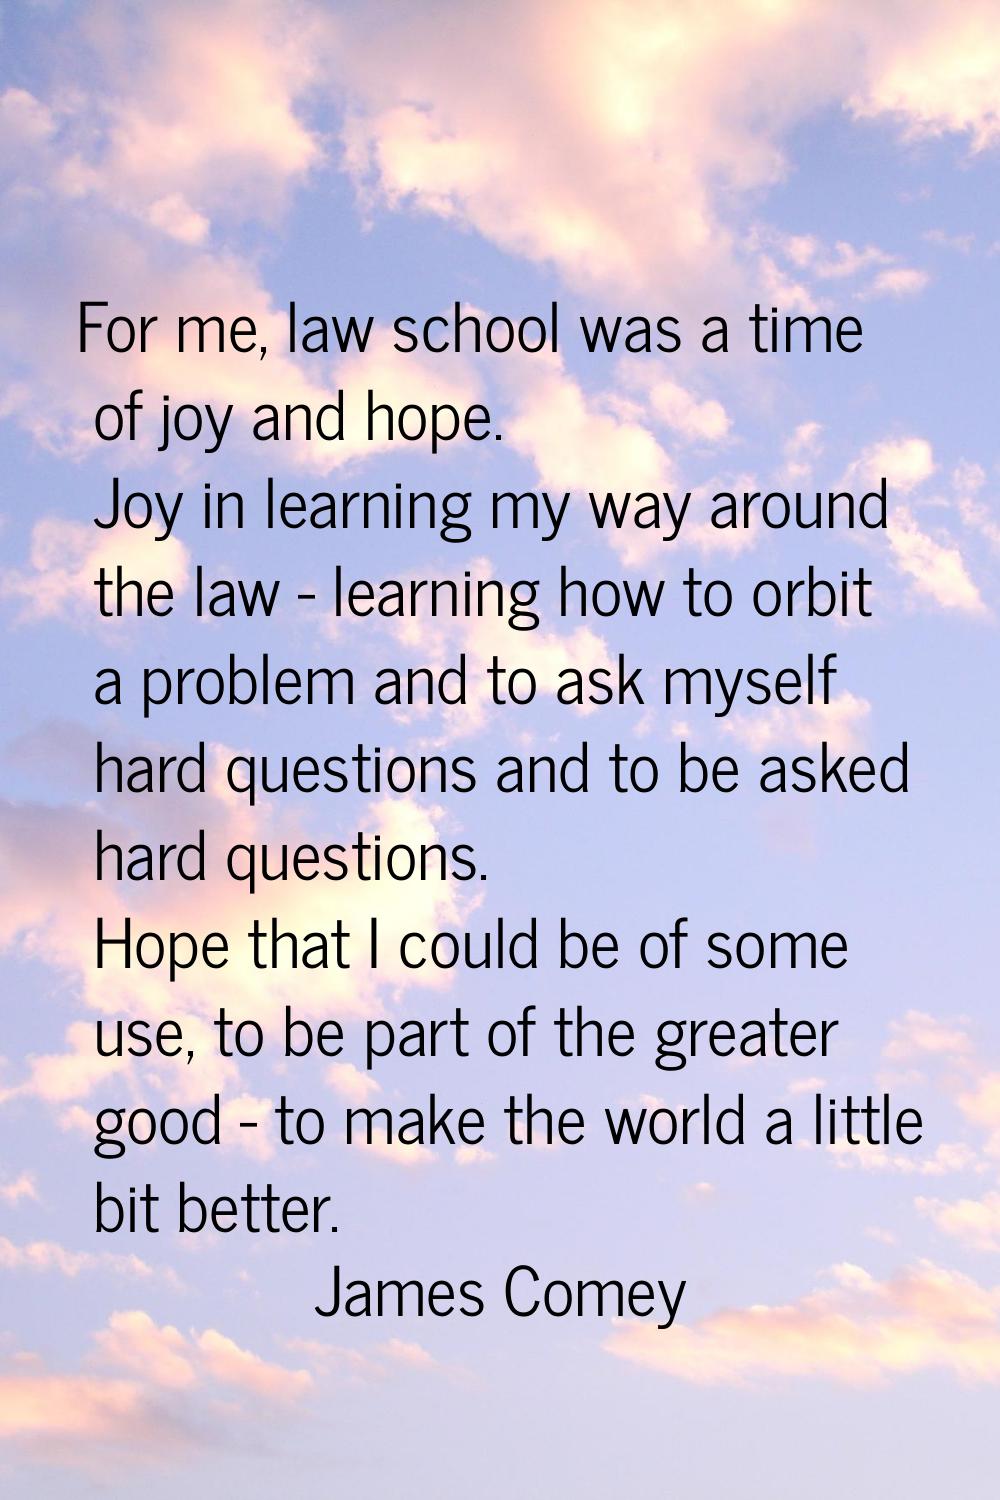 For me, law school was a time of joy and hope. Joy in learning my way around the law - learning how